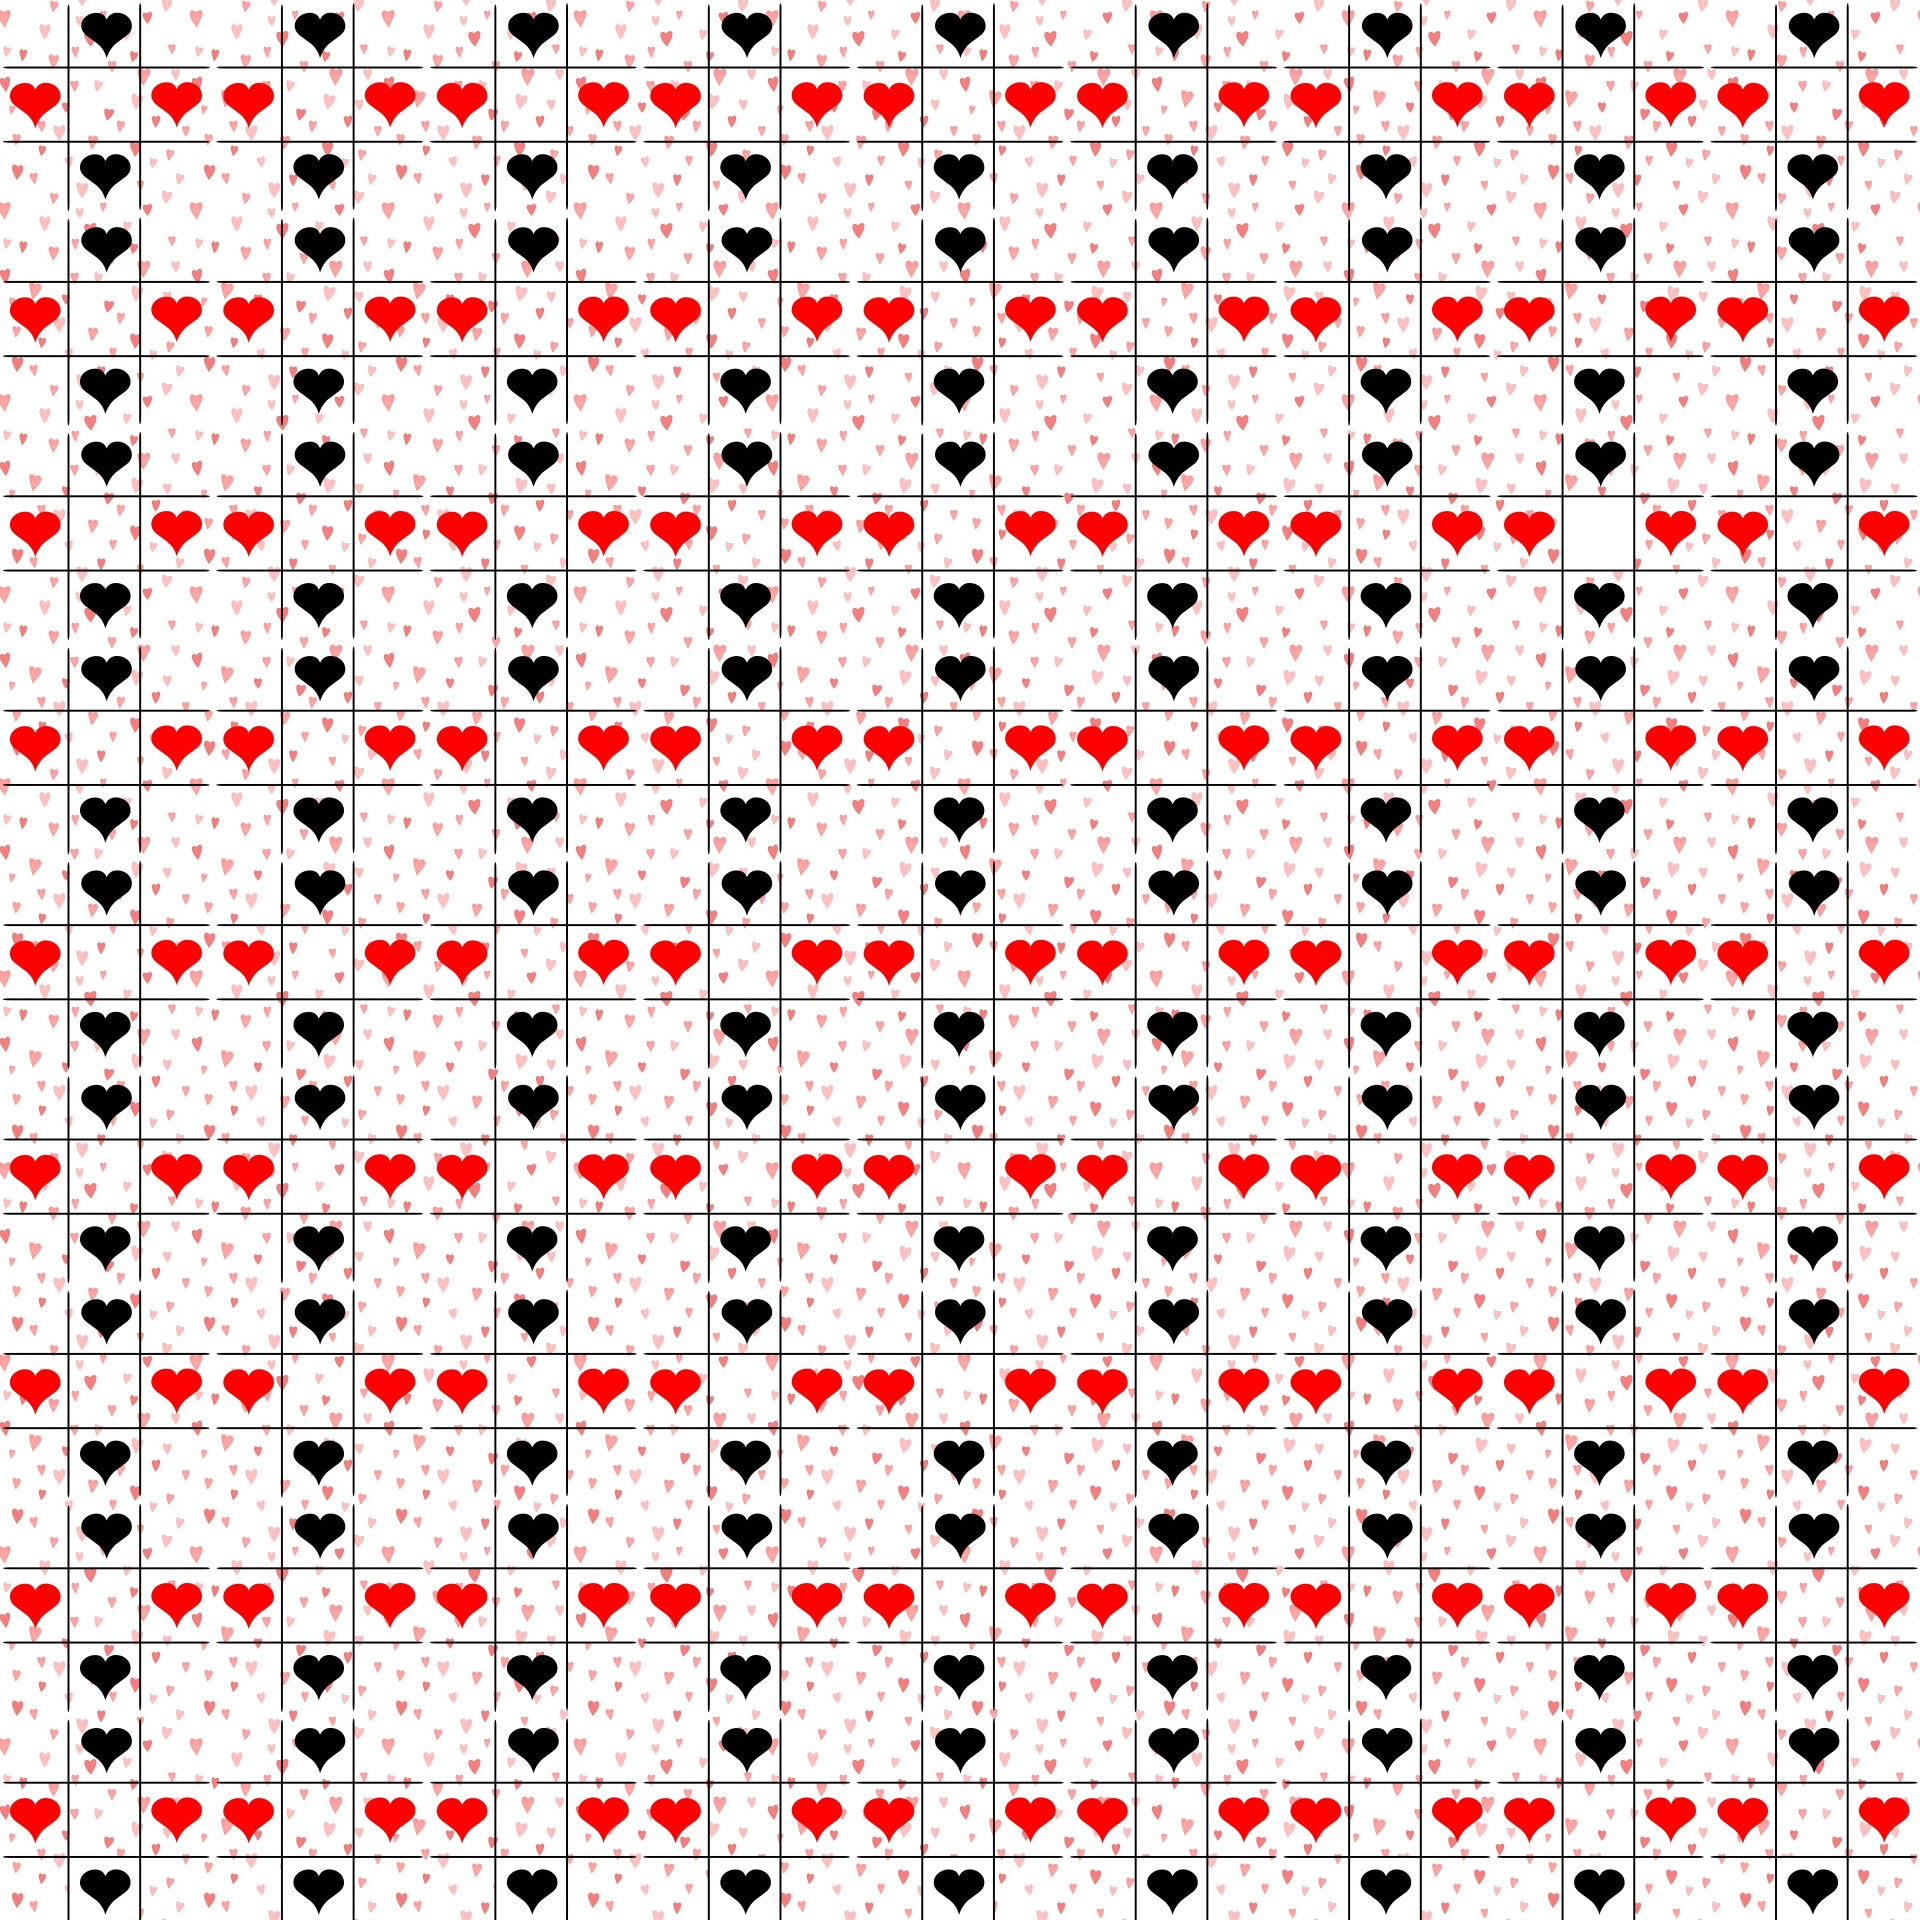 wallpaper background hearts free photo